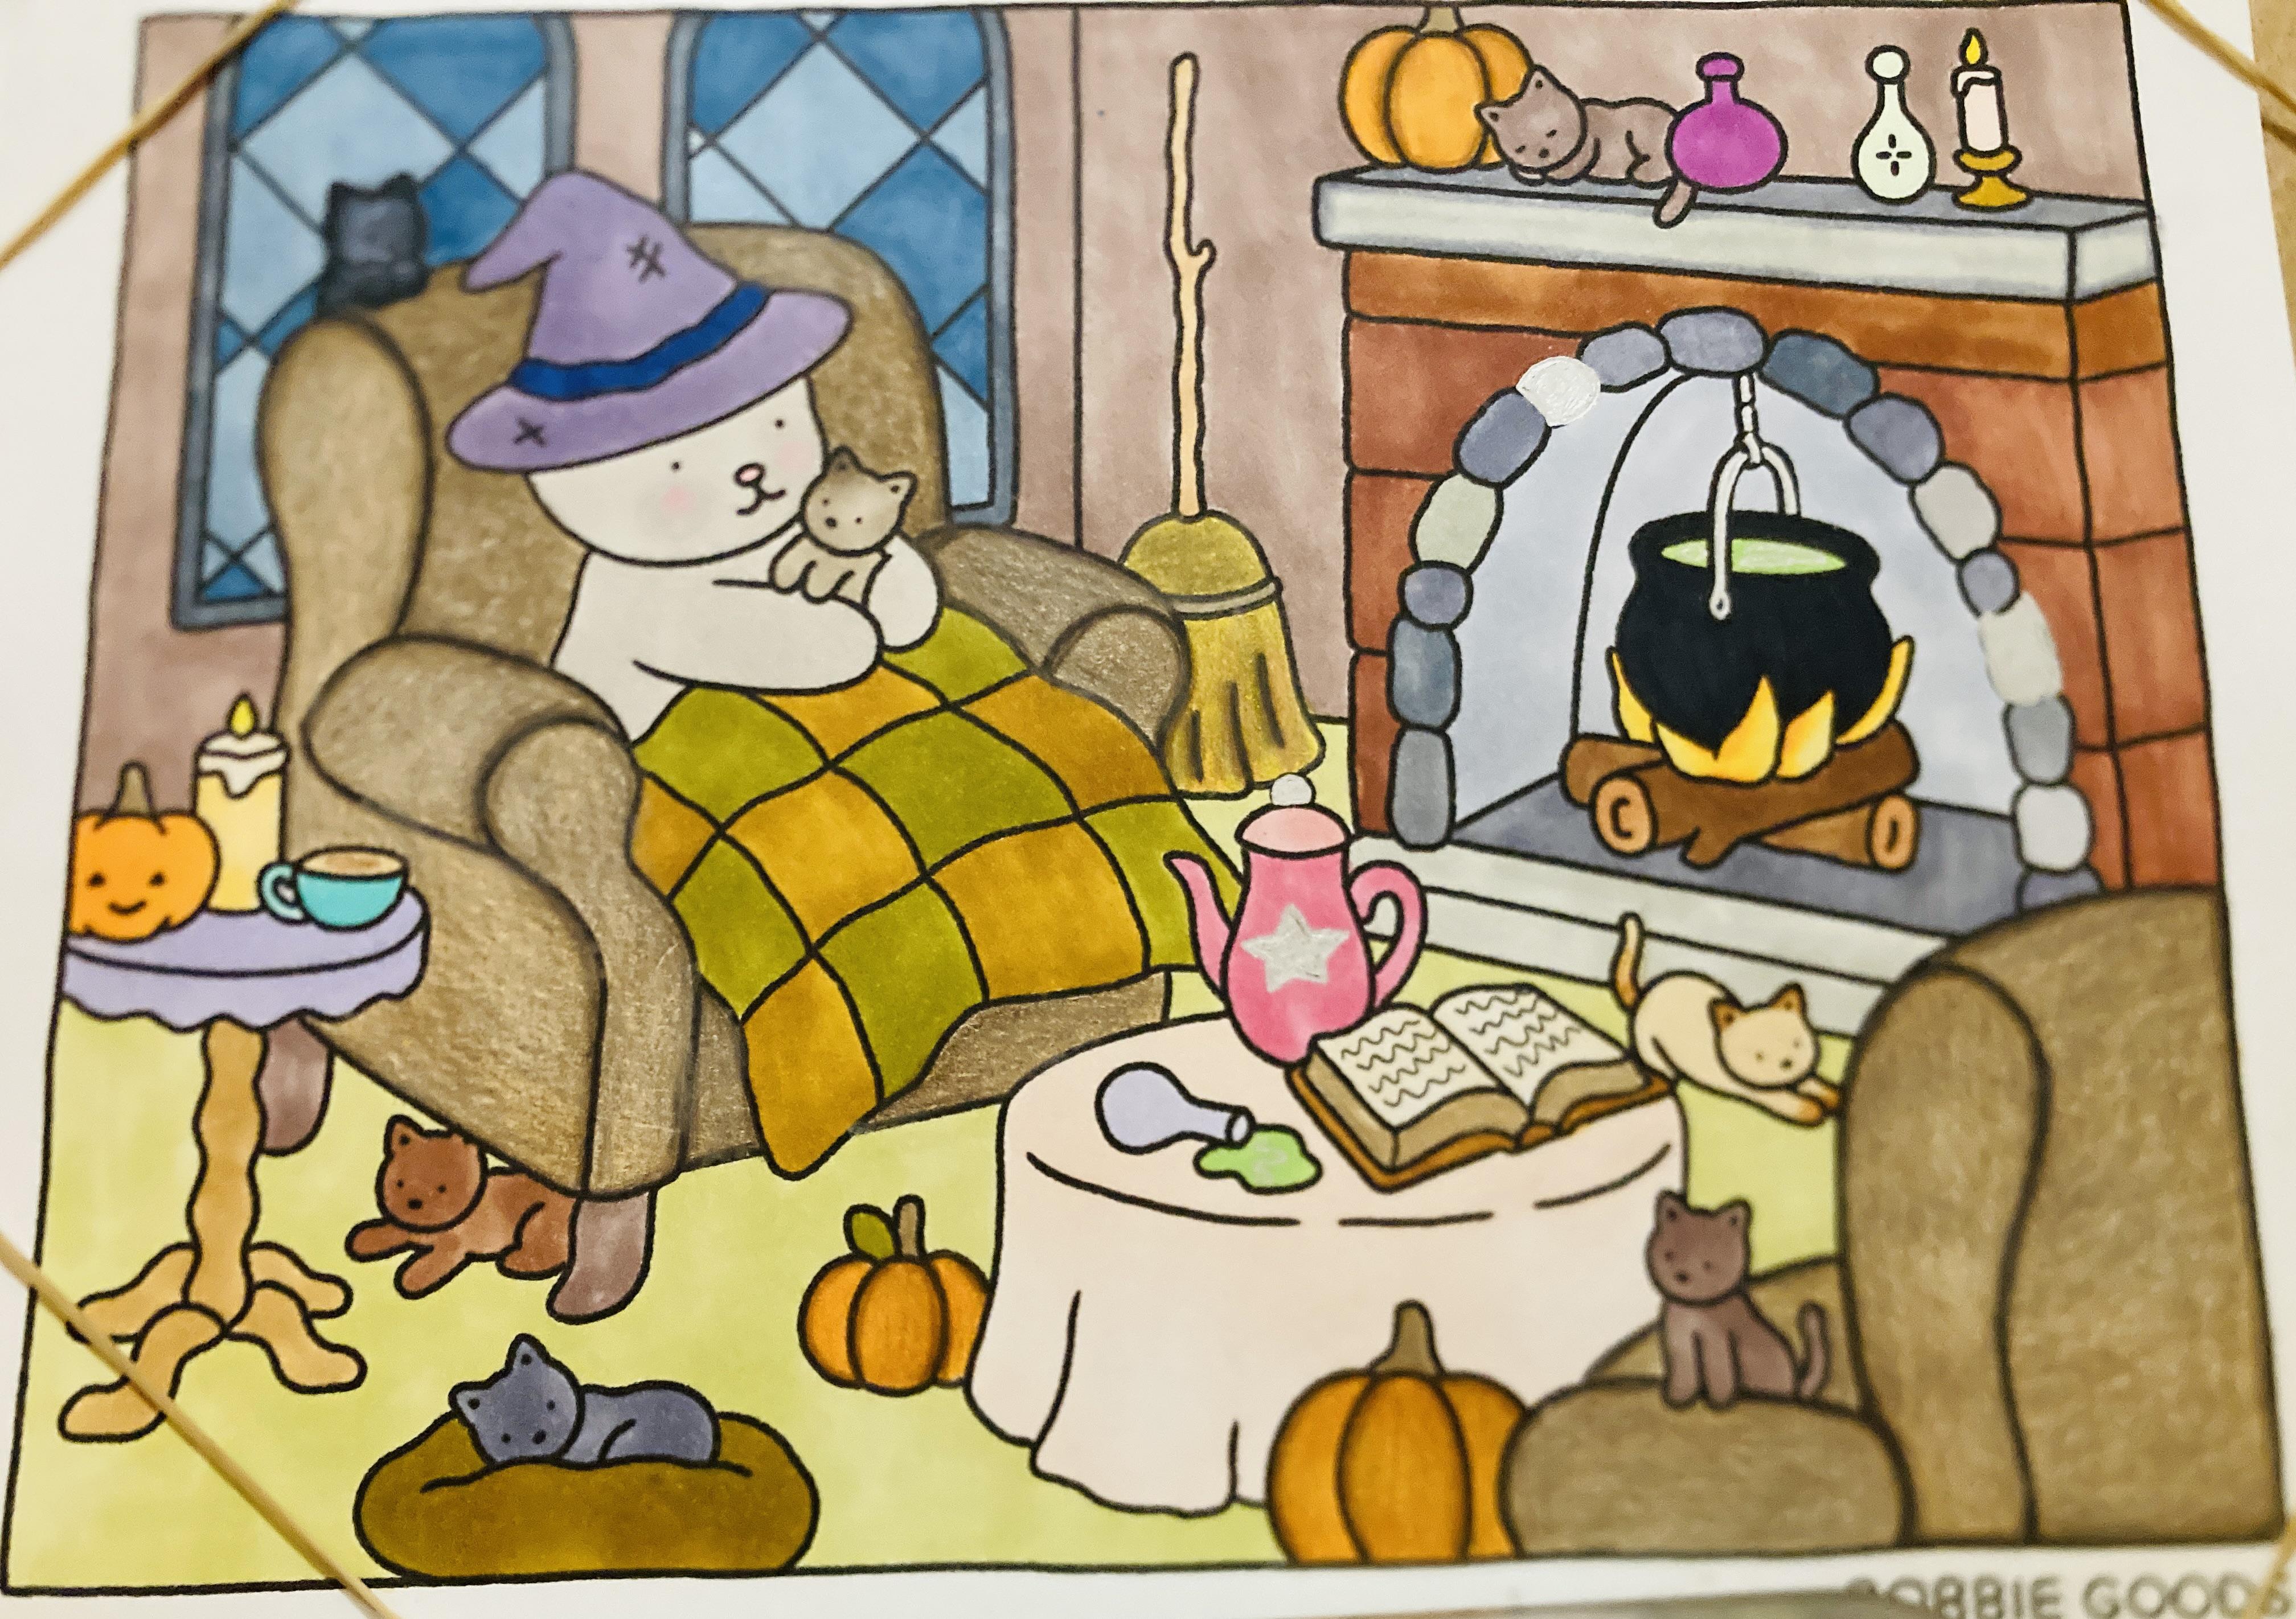 Bobbie goods halloween pdf i love the kitties ðâ i used copics and ohuhu alcohol markers colored pencils for shading rcoloring